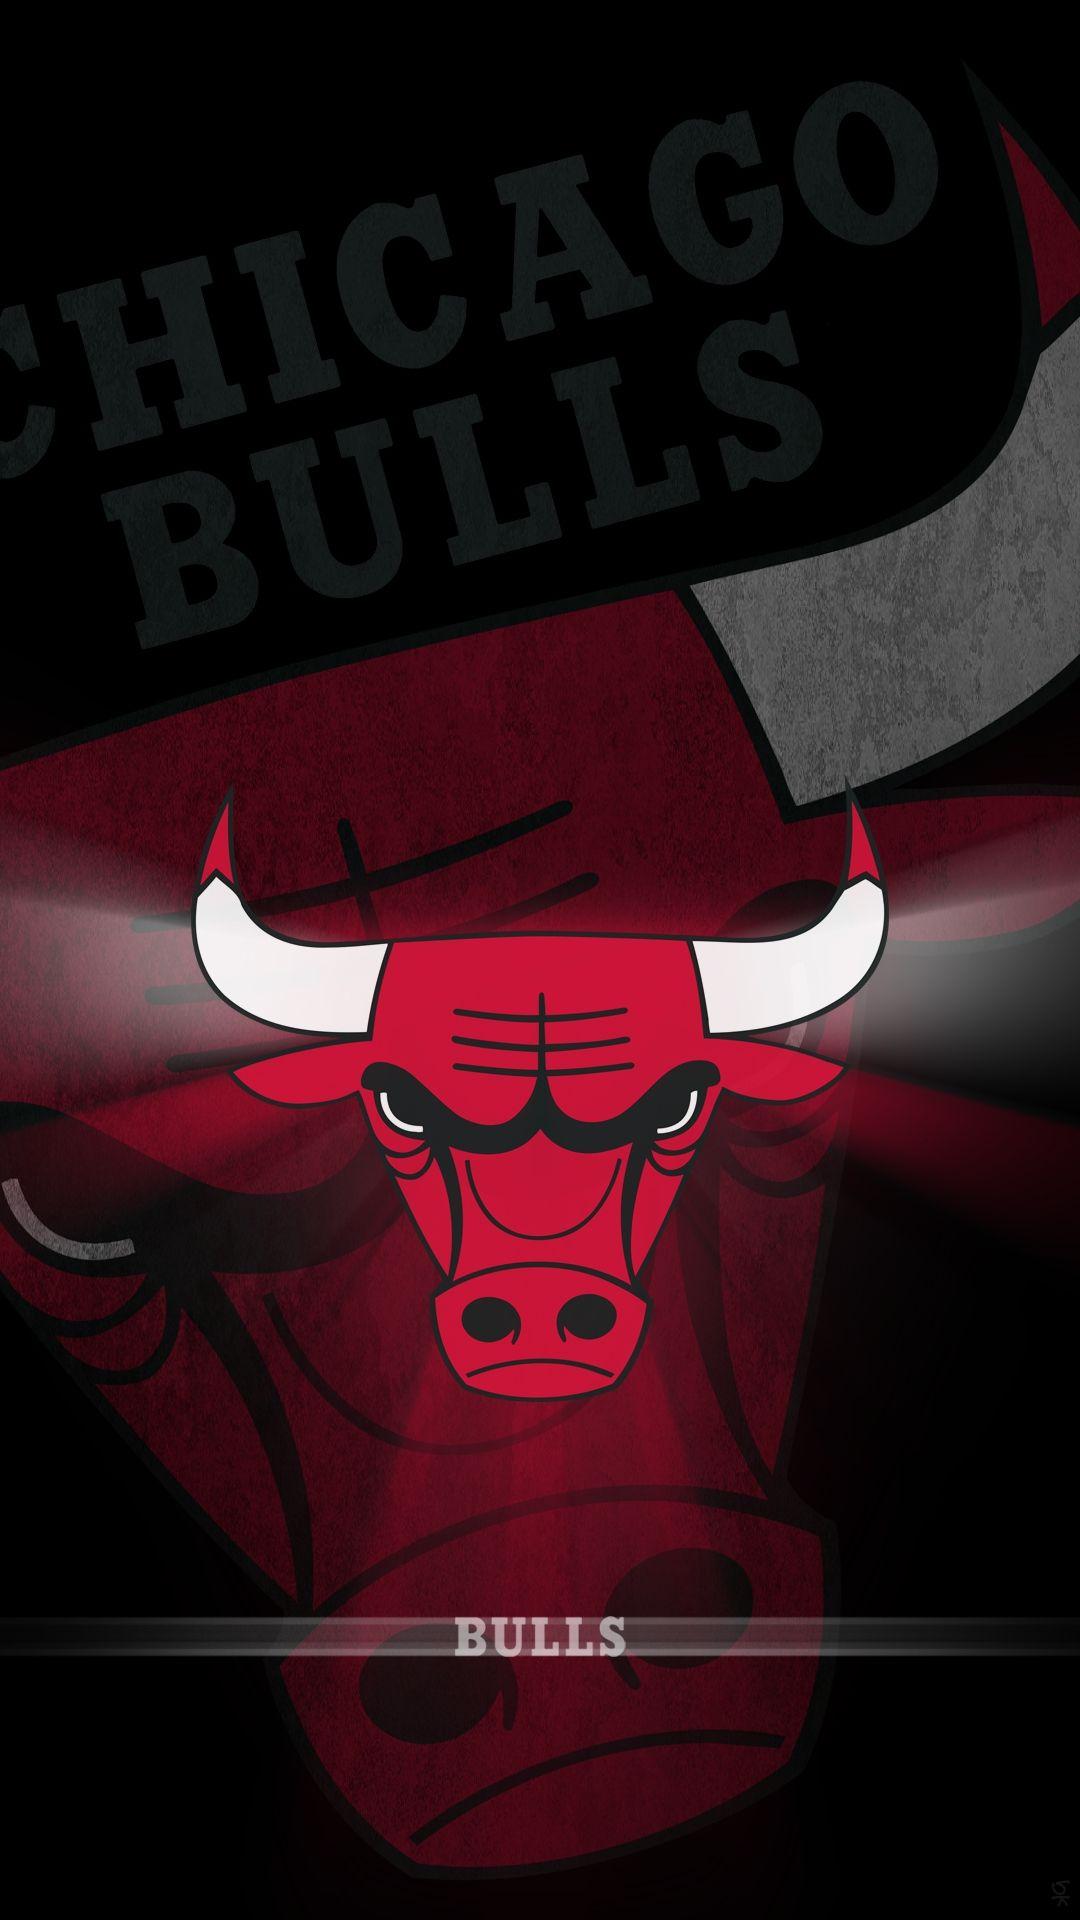 Most Popular Chicago Bulls iPhone Wallpaper FULL HD 1080p For PC